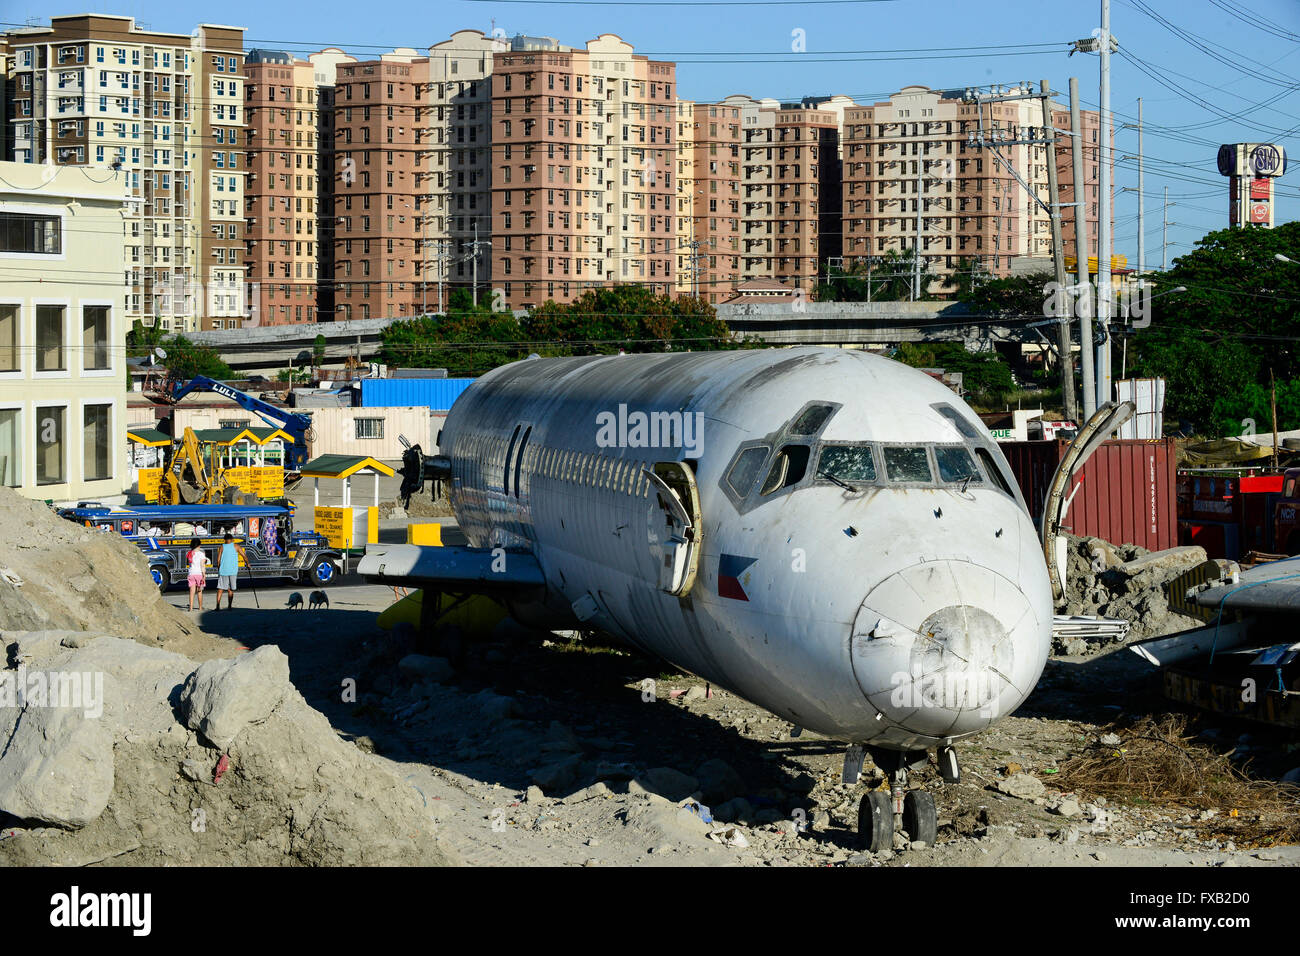 PHILIPPINES, Manila, Parañaque City, dumped airplane McDonnell Douglas DC-9 of philippine Airline Cebu Pacific, behind appartment tower Stock Photo